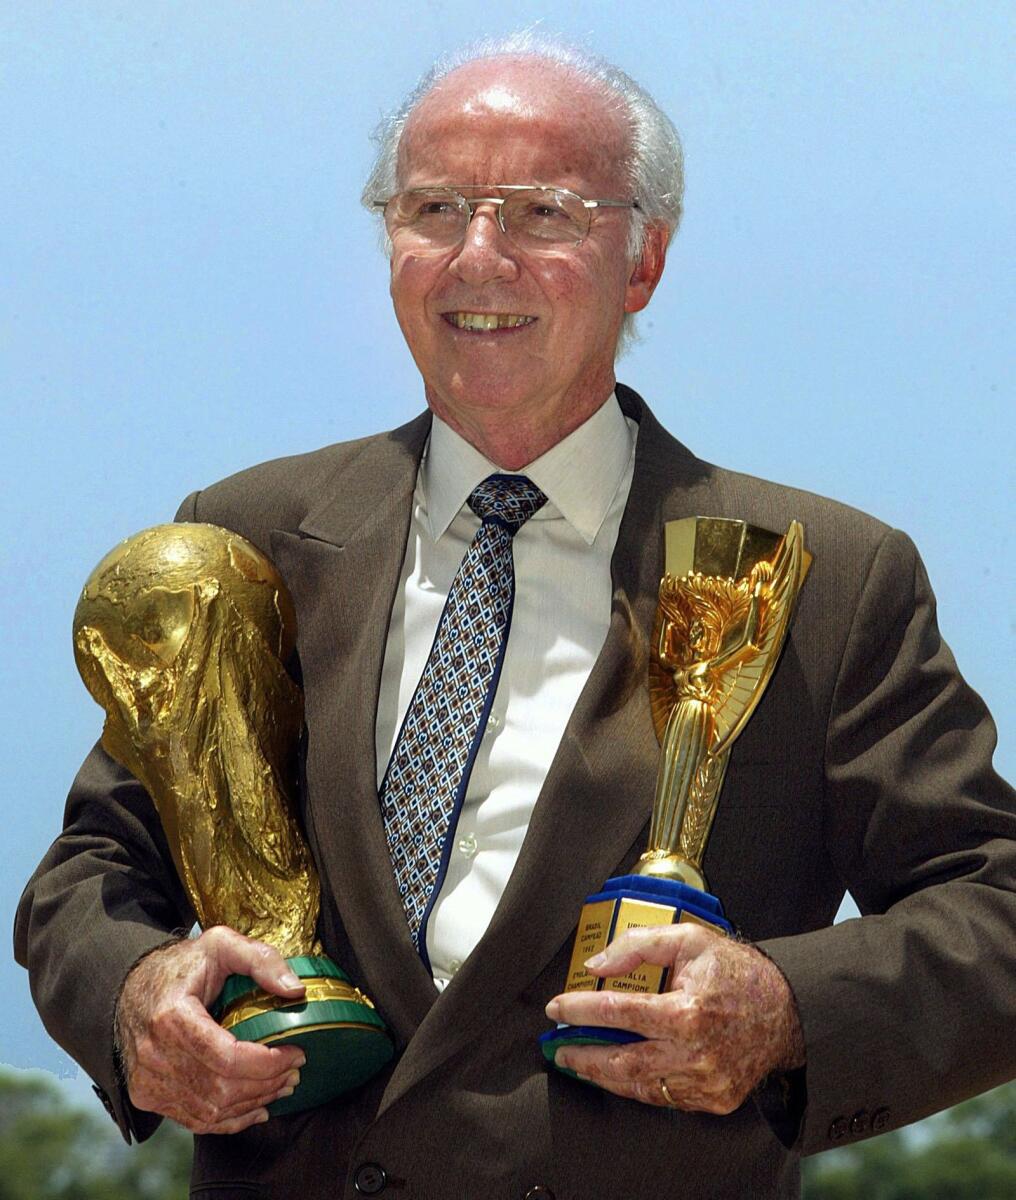 Four-time World Cup winner Mario Zagallo holds the Jules Rimet (R) and FIFA trophies as he poses for photographers in Rio de Janeiro, Brazil in March 2003. = AFP